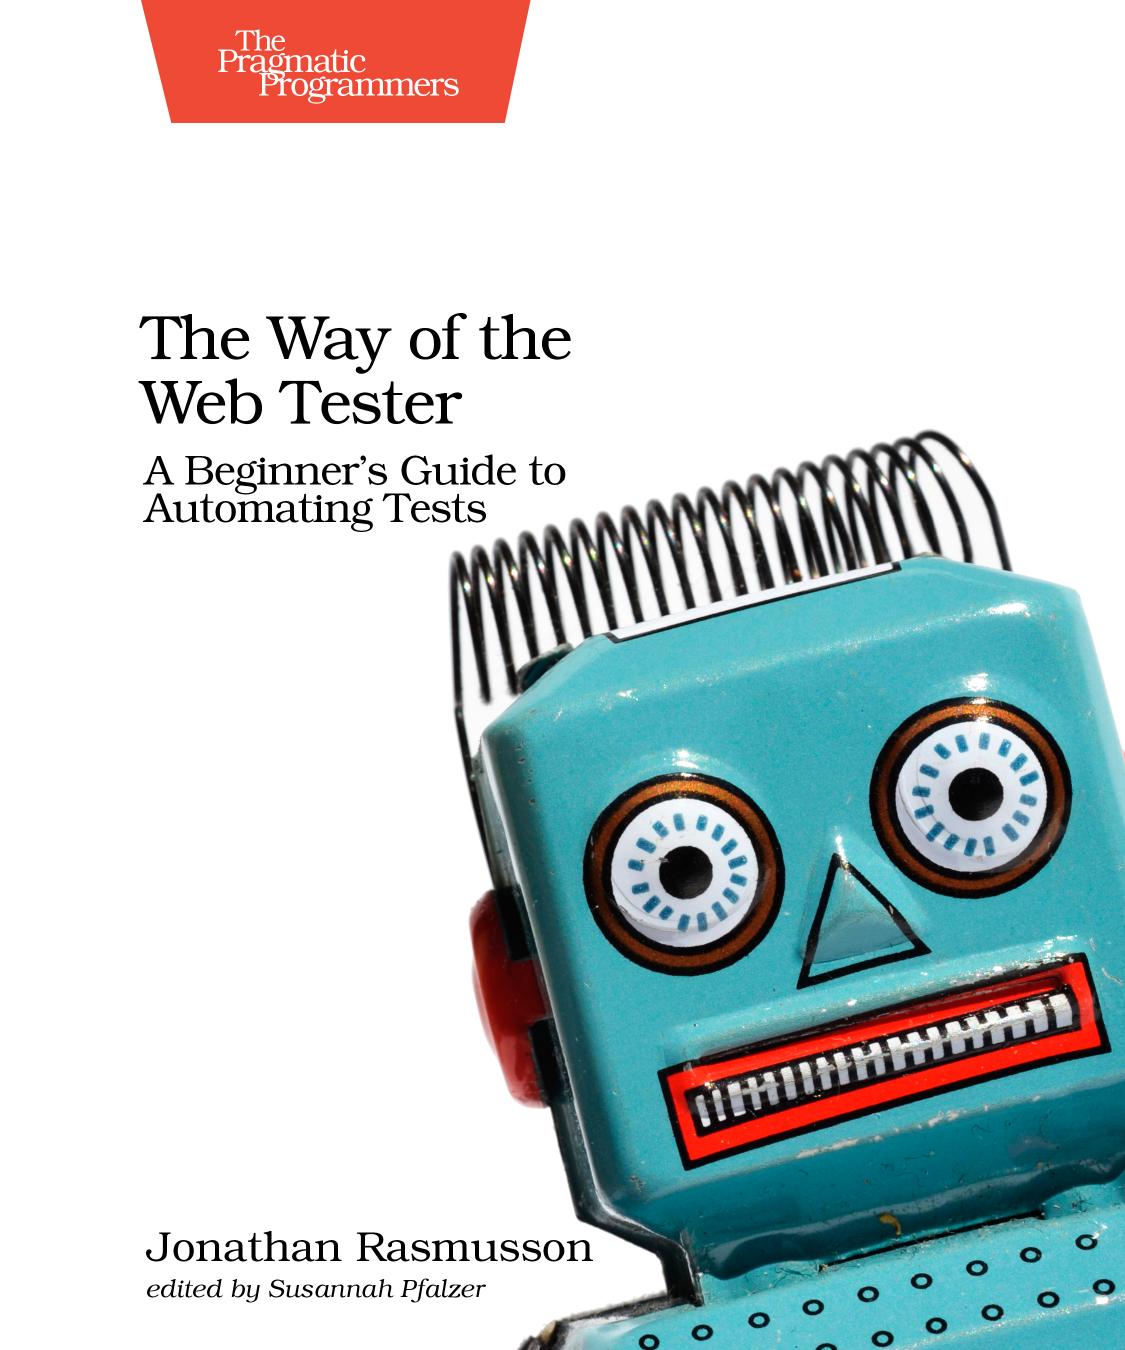 The Way of the Web Tester: A Beginner's Guide to Automating Tests